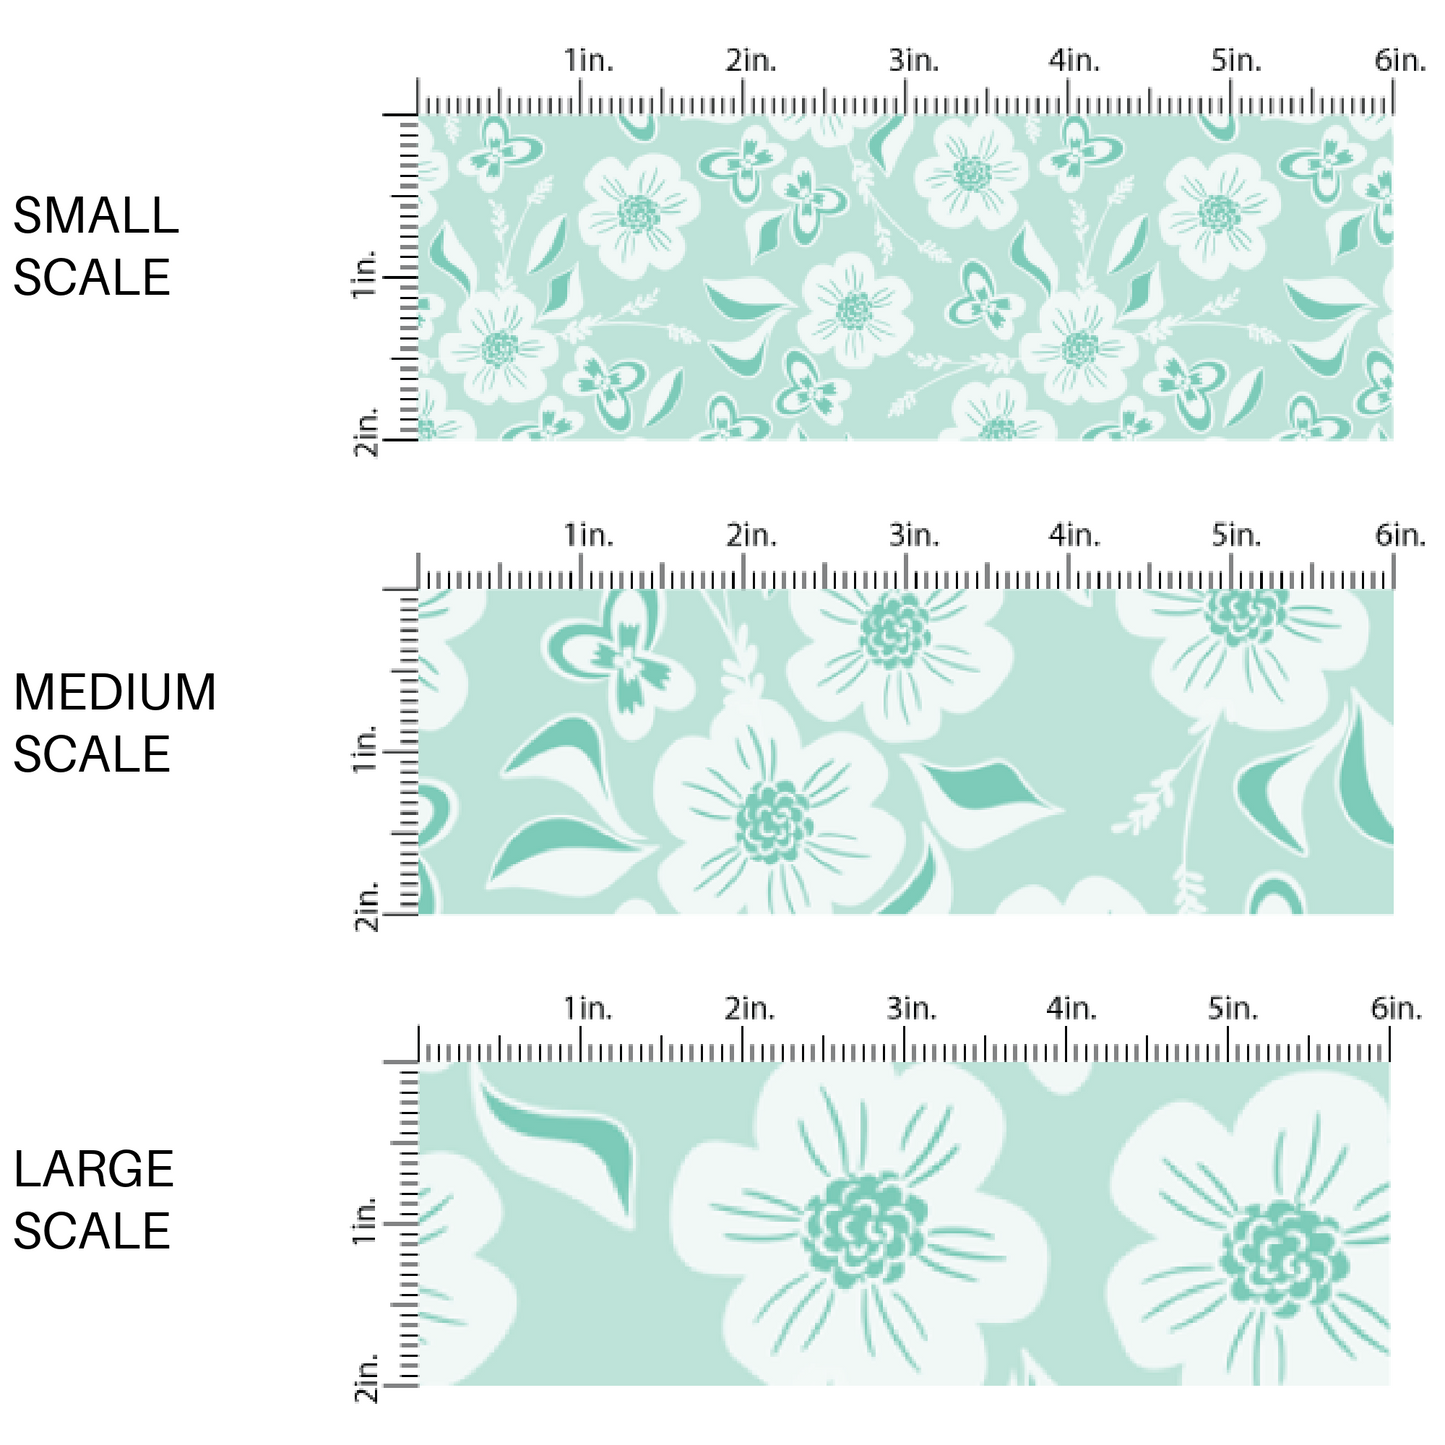 Aqua Fabric by the yard scaled image guide with light blue floral designs